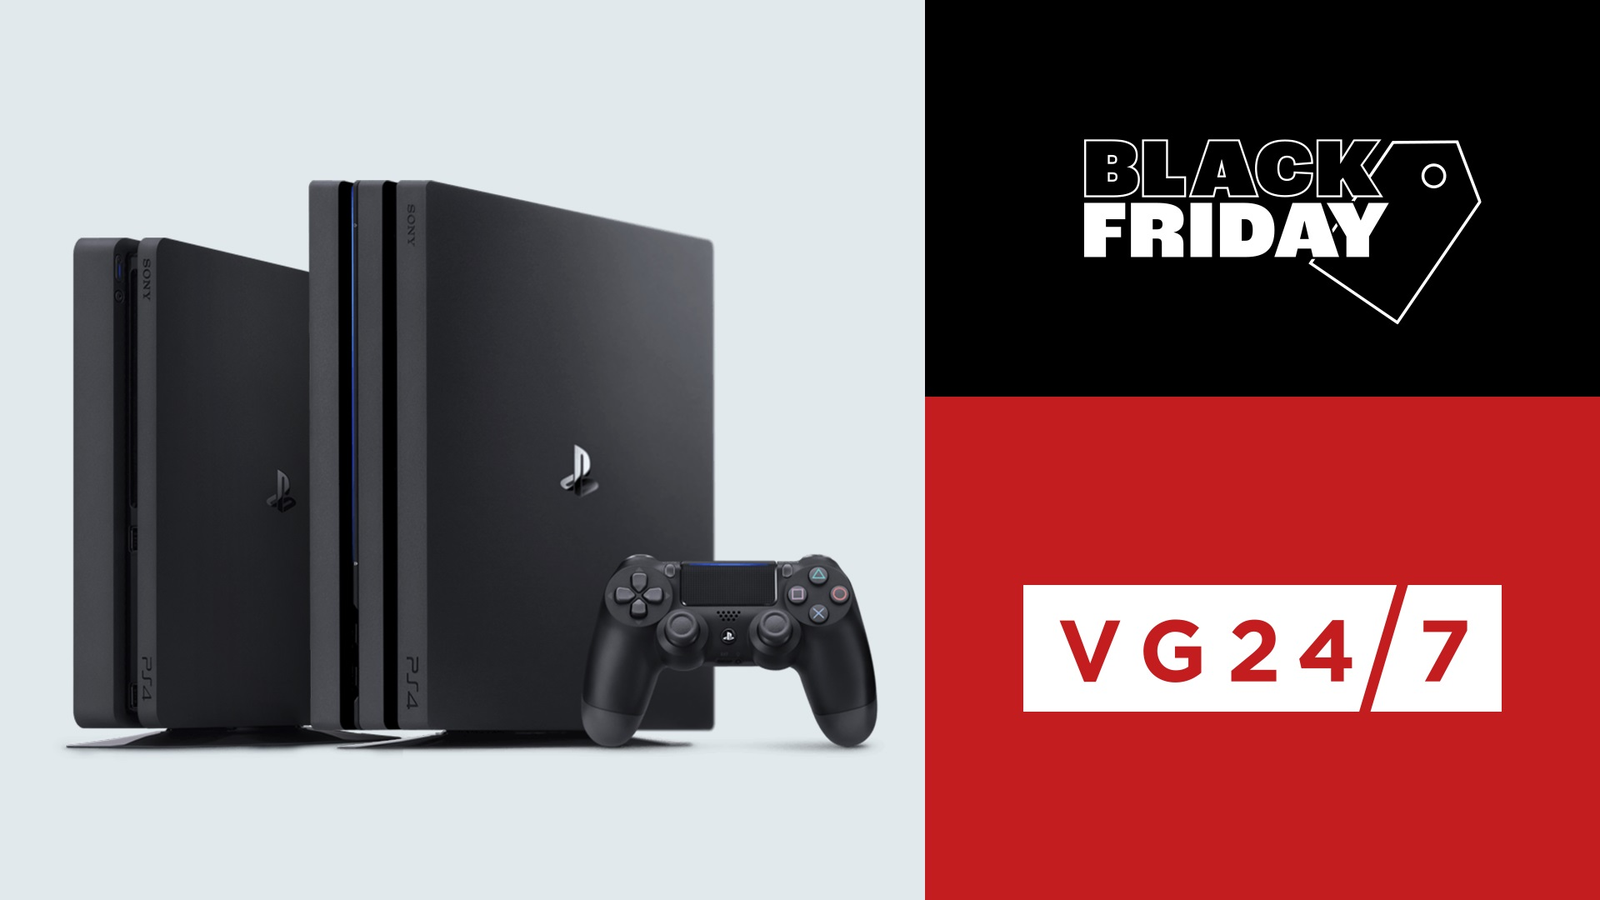 Details About PlayStation Black Friday Deals 2021 Might Have Leaked